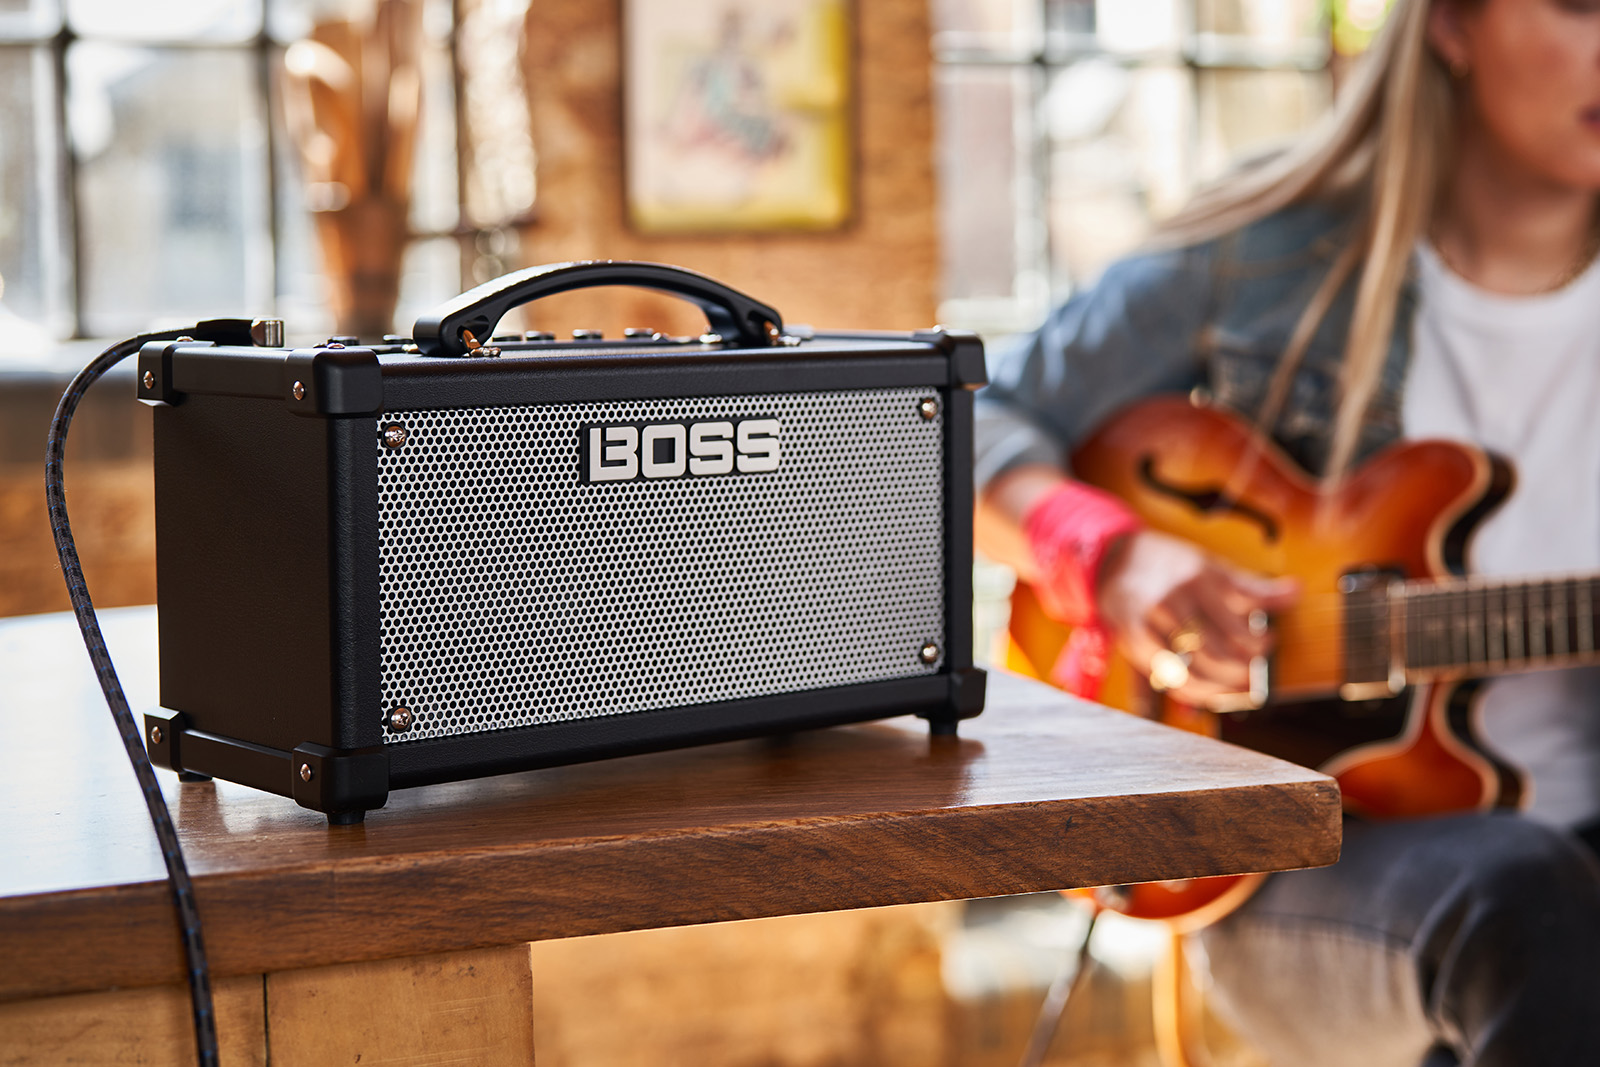 CUBE: The Portable Amp That Took on the World 